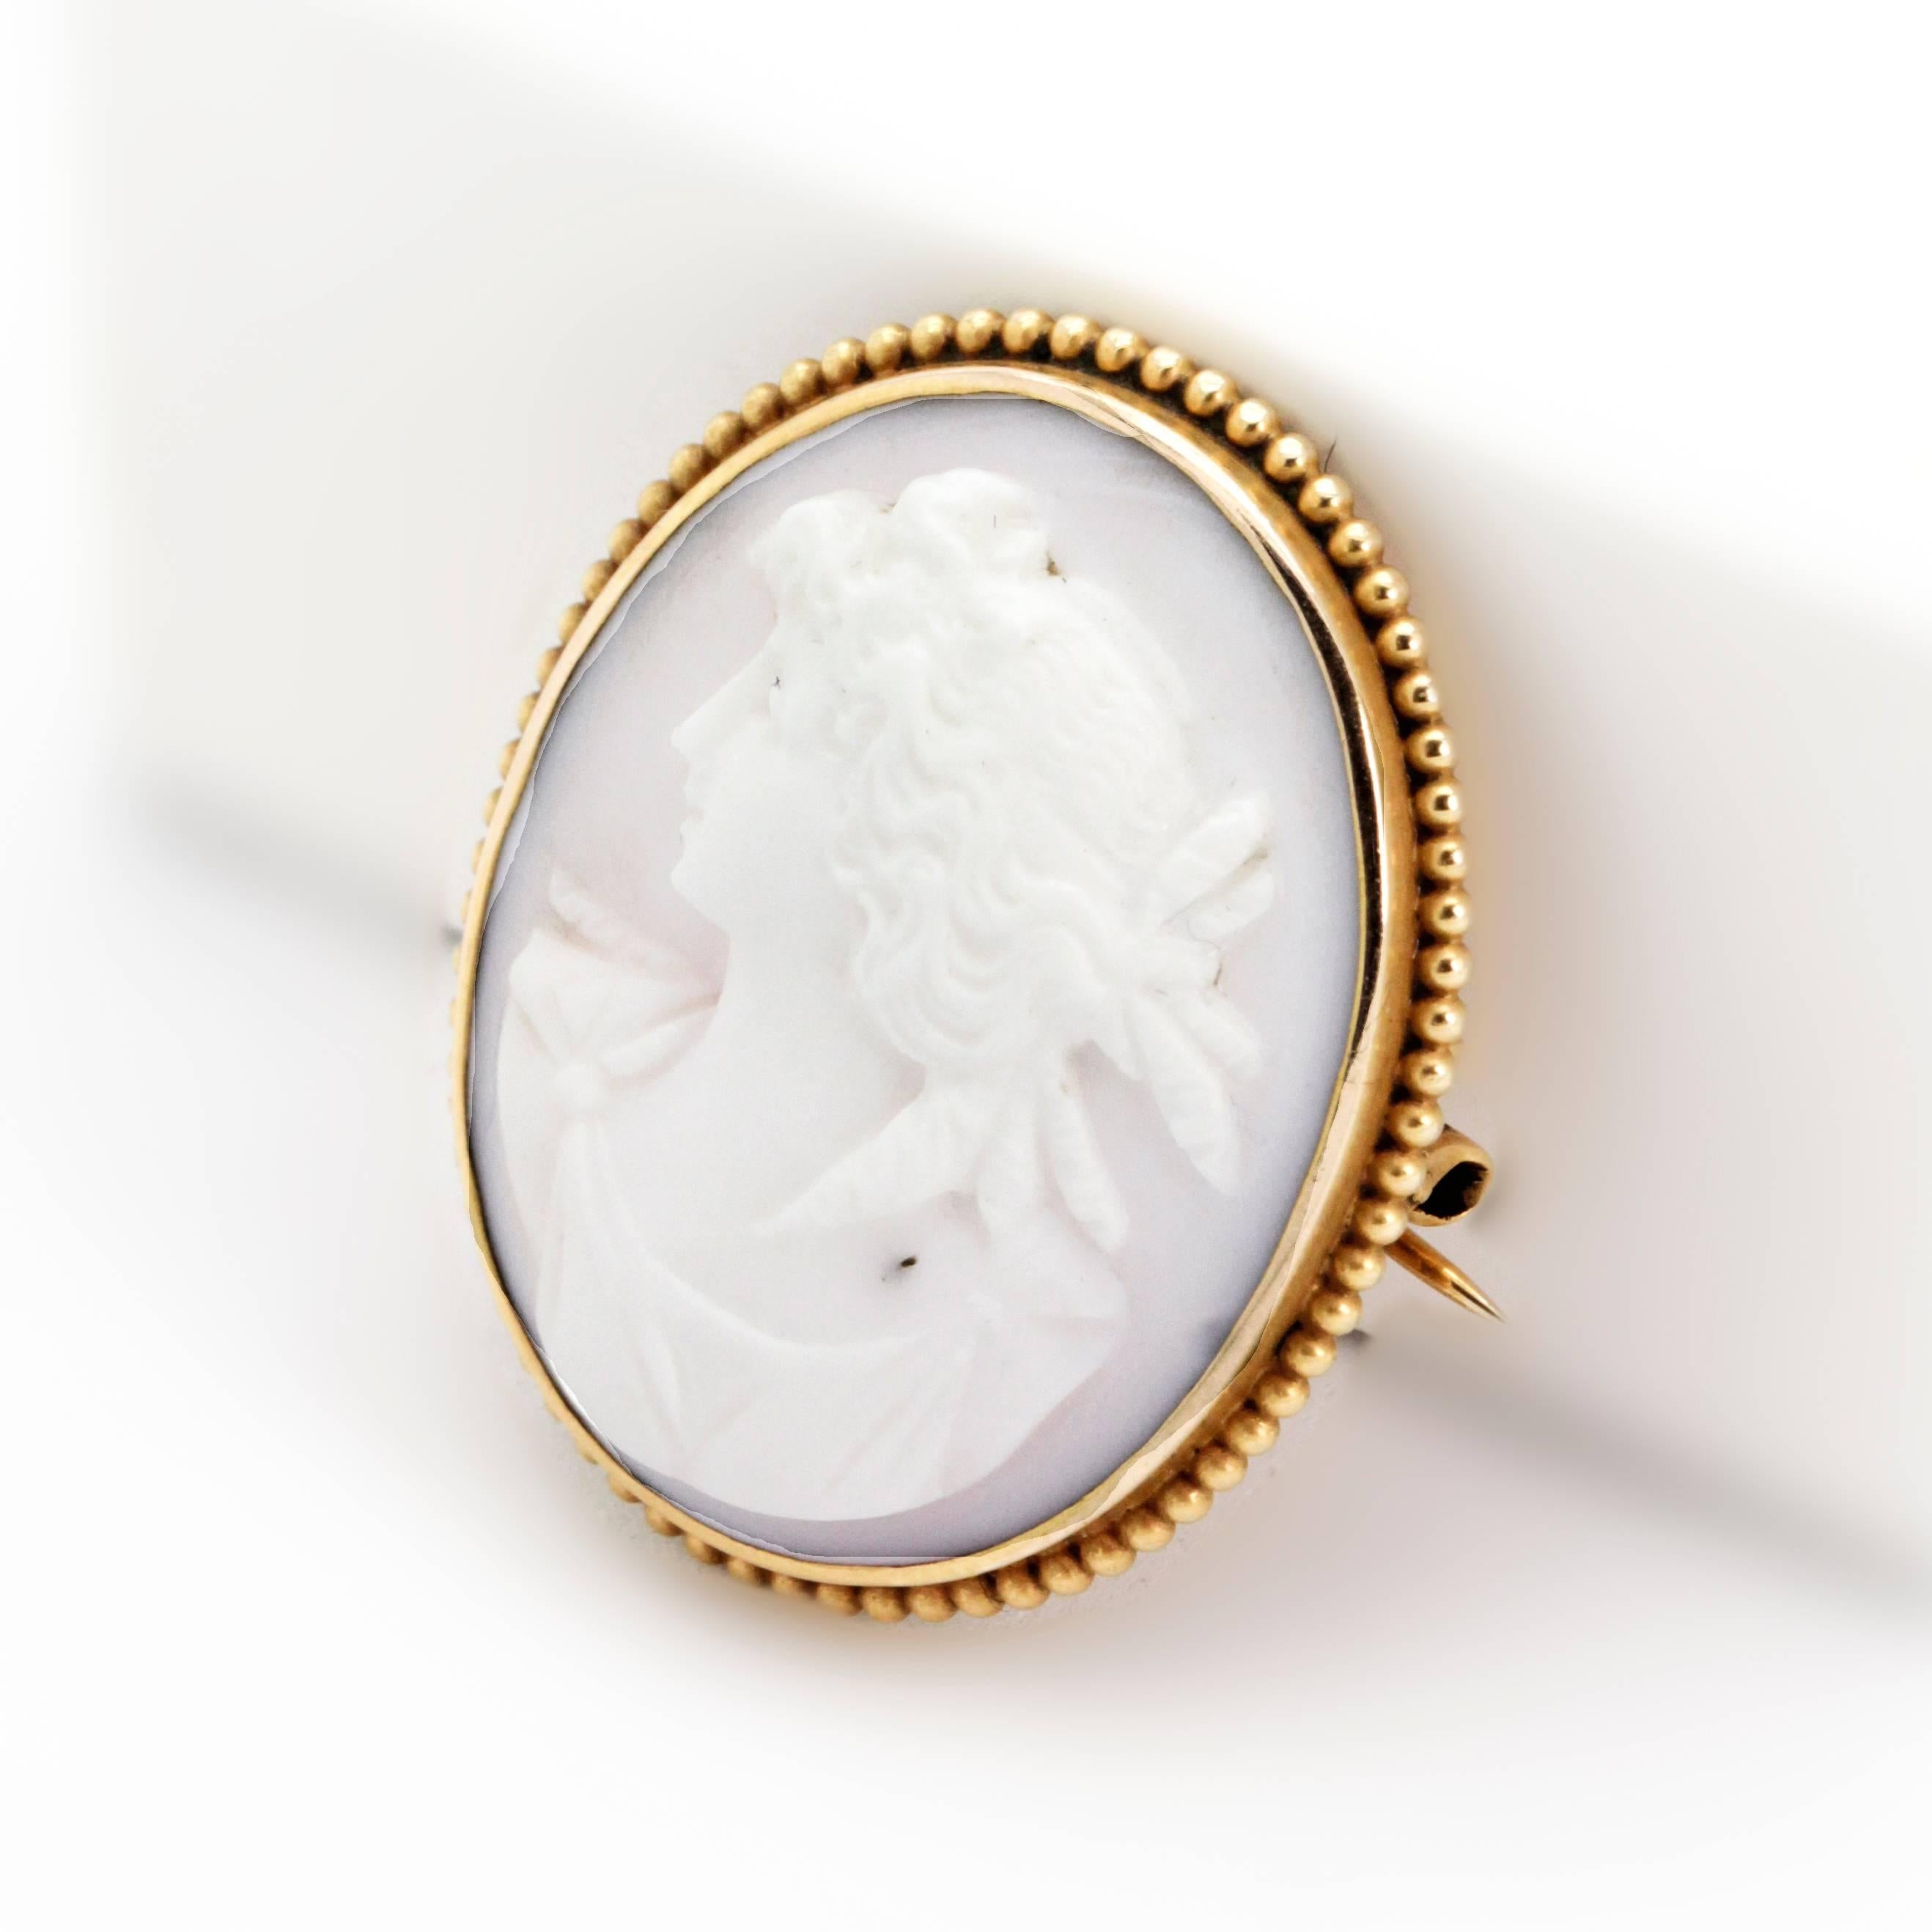 Lovely Victorian Original Cameo Brooch In Excellent Condition For Sale In Sydney CBD, AU